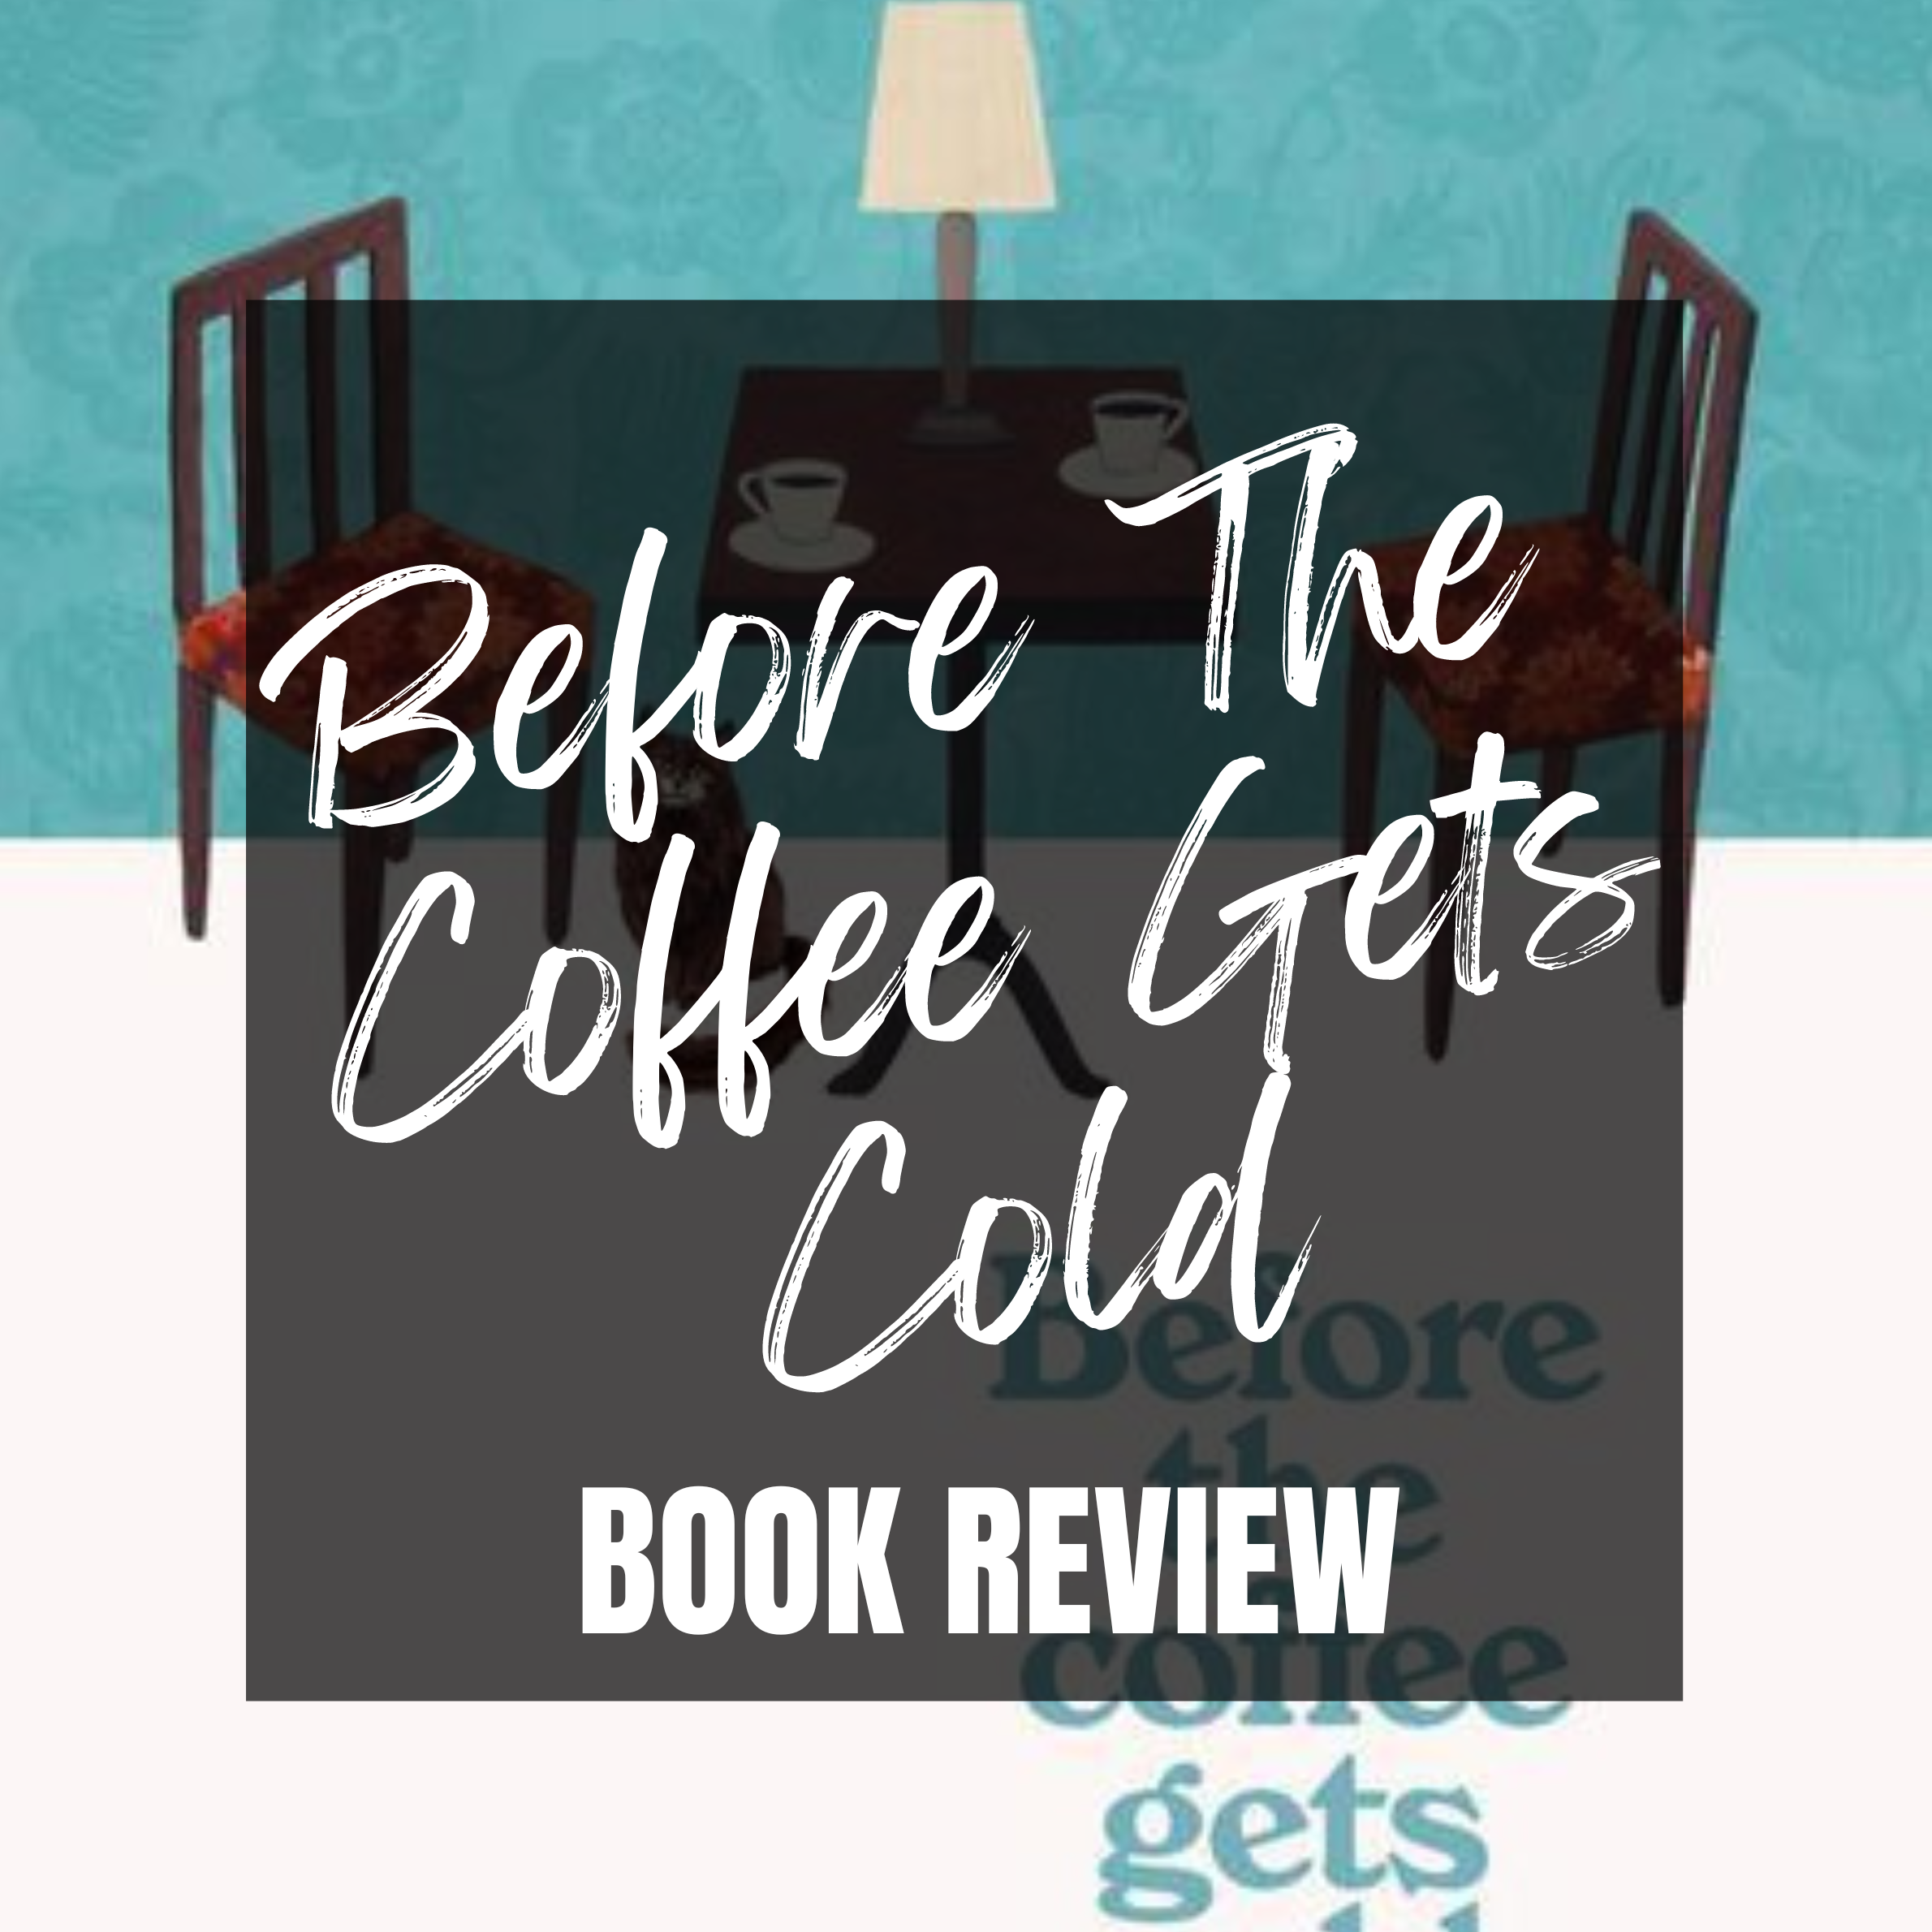 Before The Coffee Gets Cold by Toshikazu Kawaguchi–ATLP Book Review